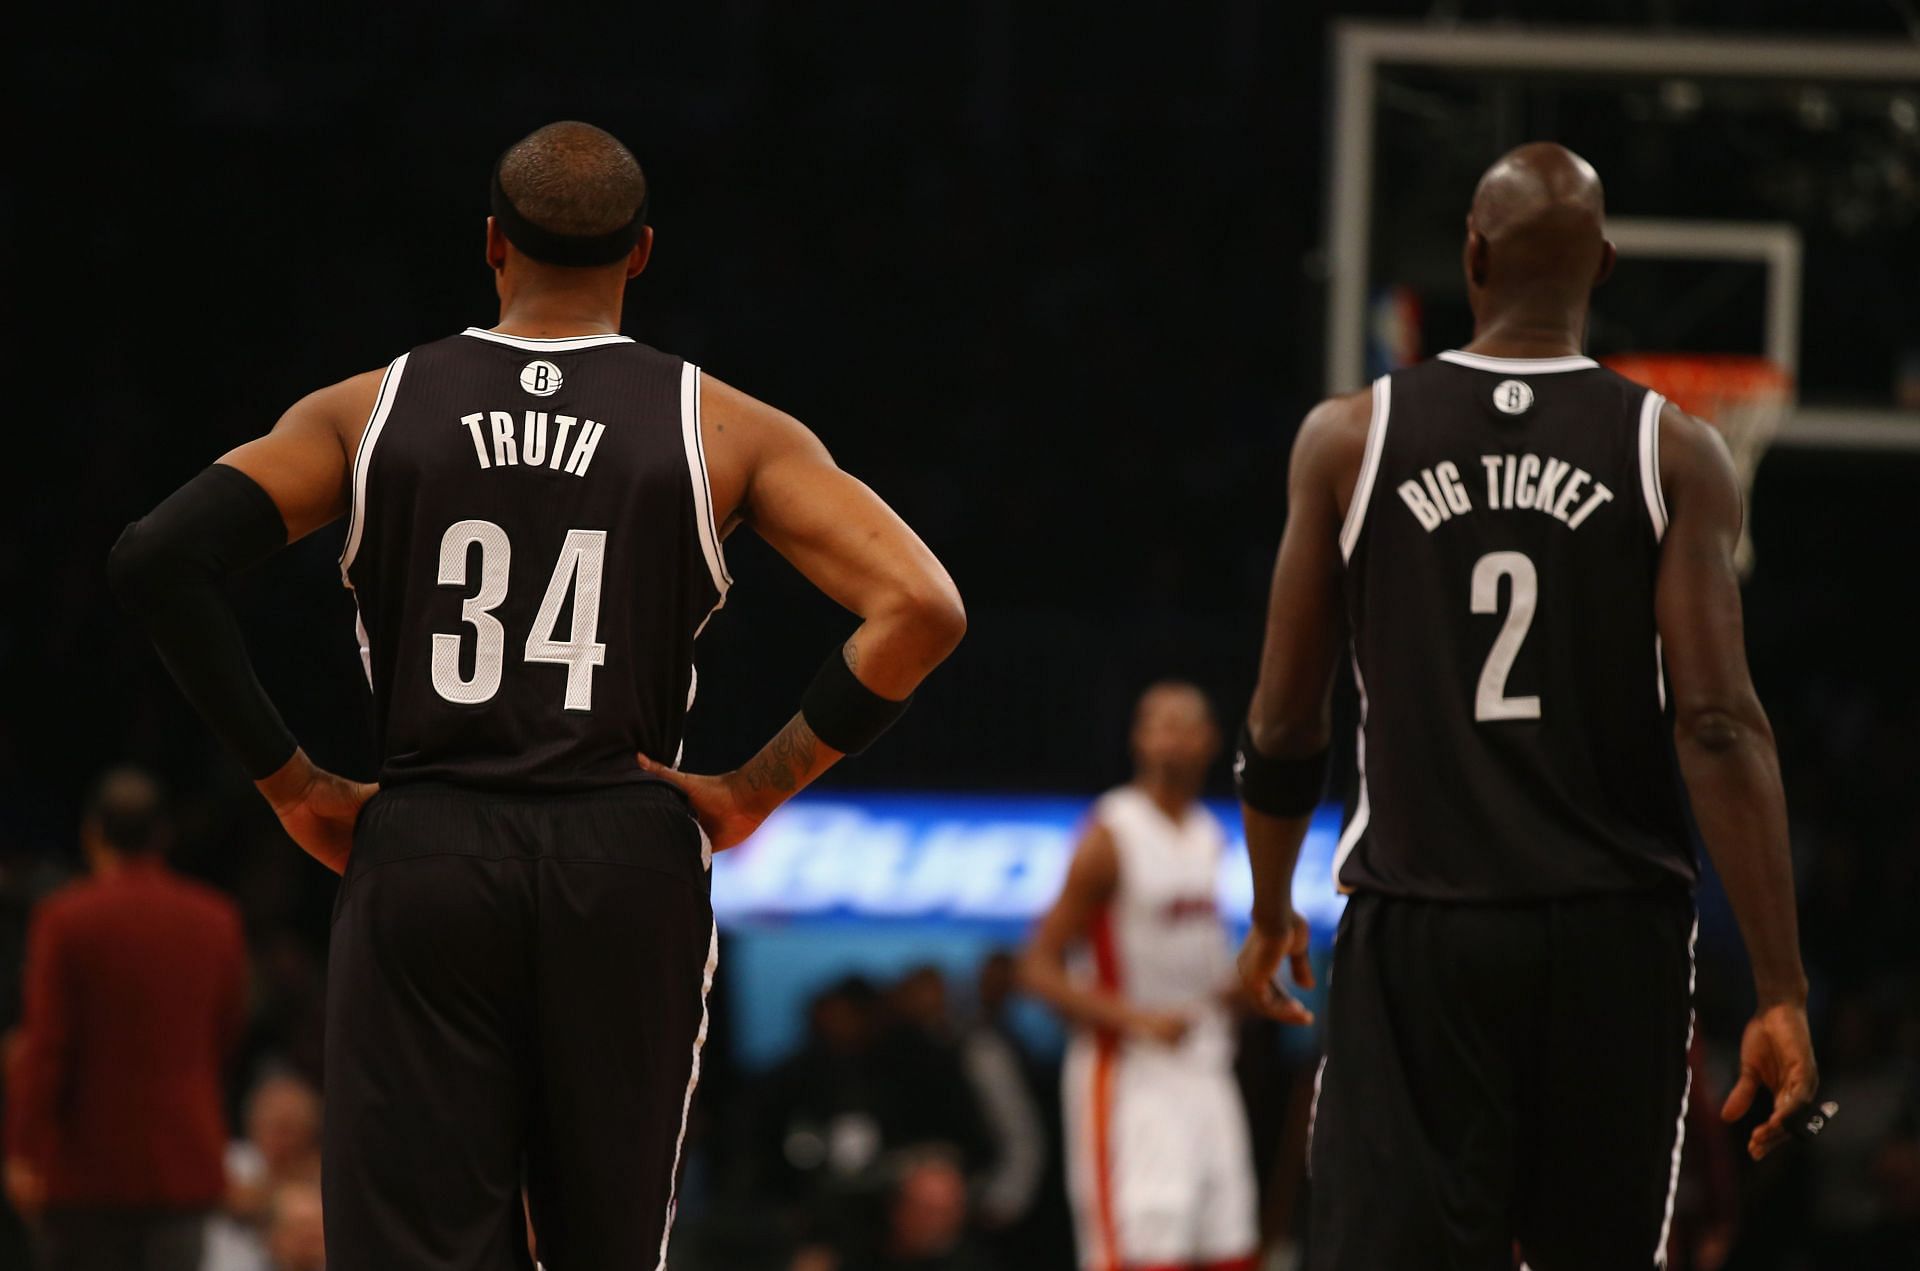 Piece and Garnett were in final stages of their careers in Brooklyn.